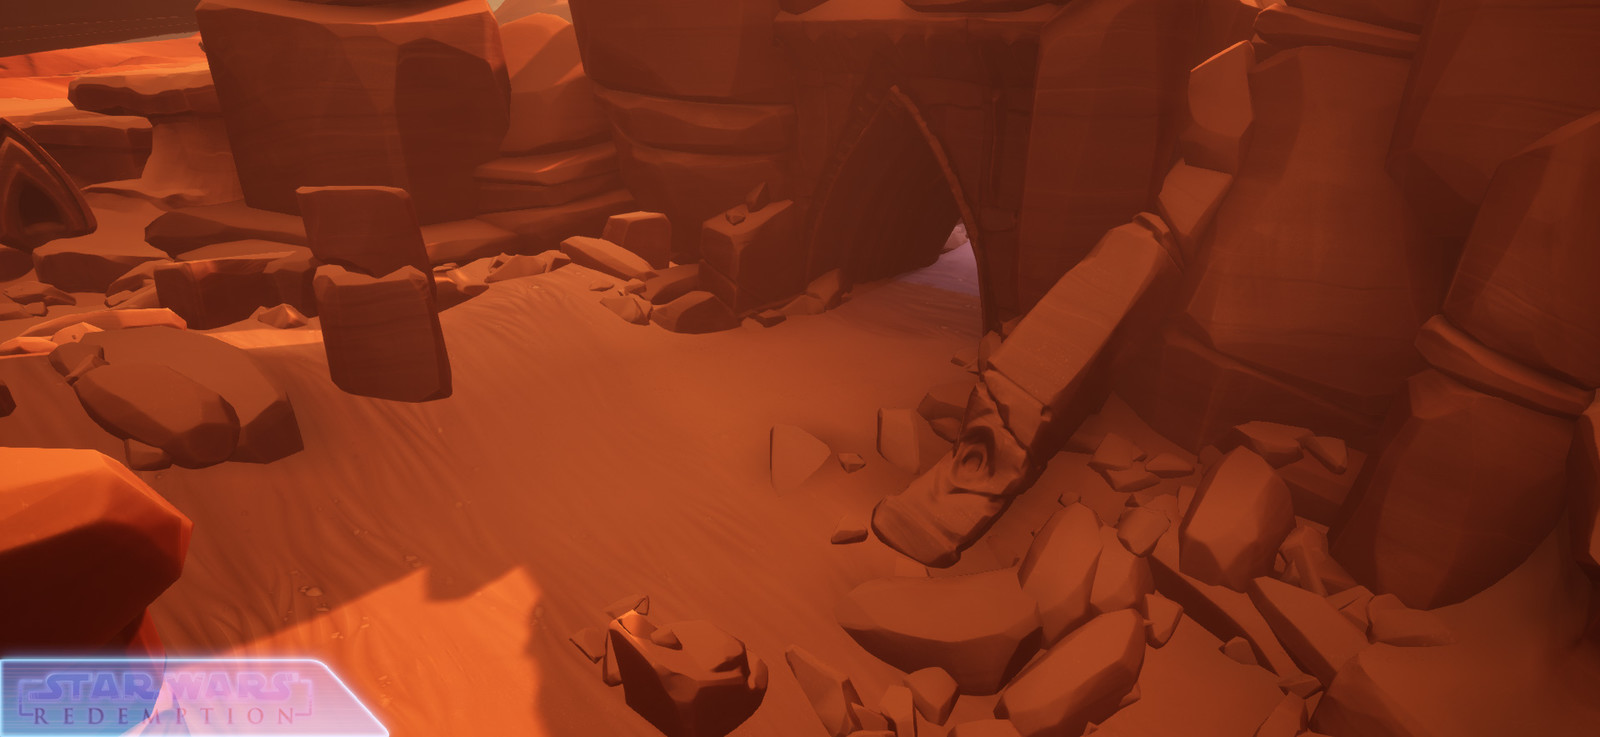 same as above, it's actually the fist natural place I made for this project, playing with triplanar projected sand was super fun to do =)